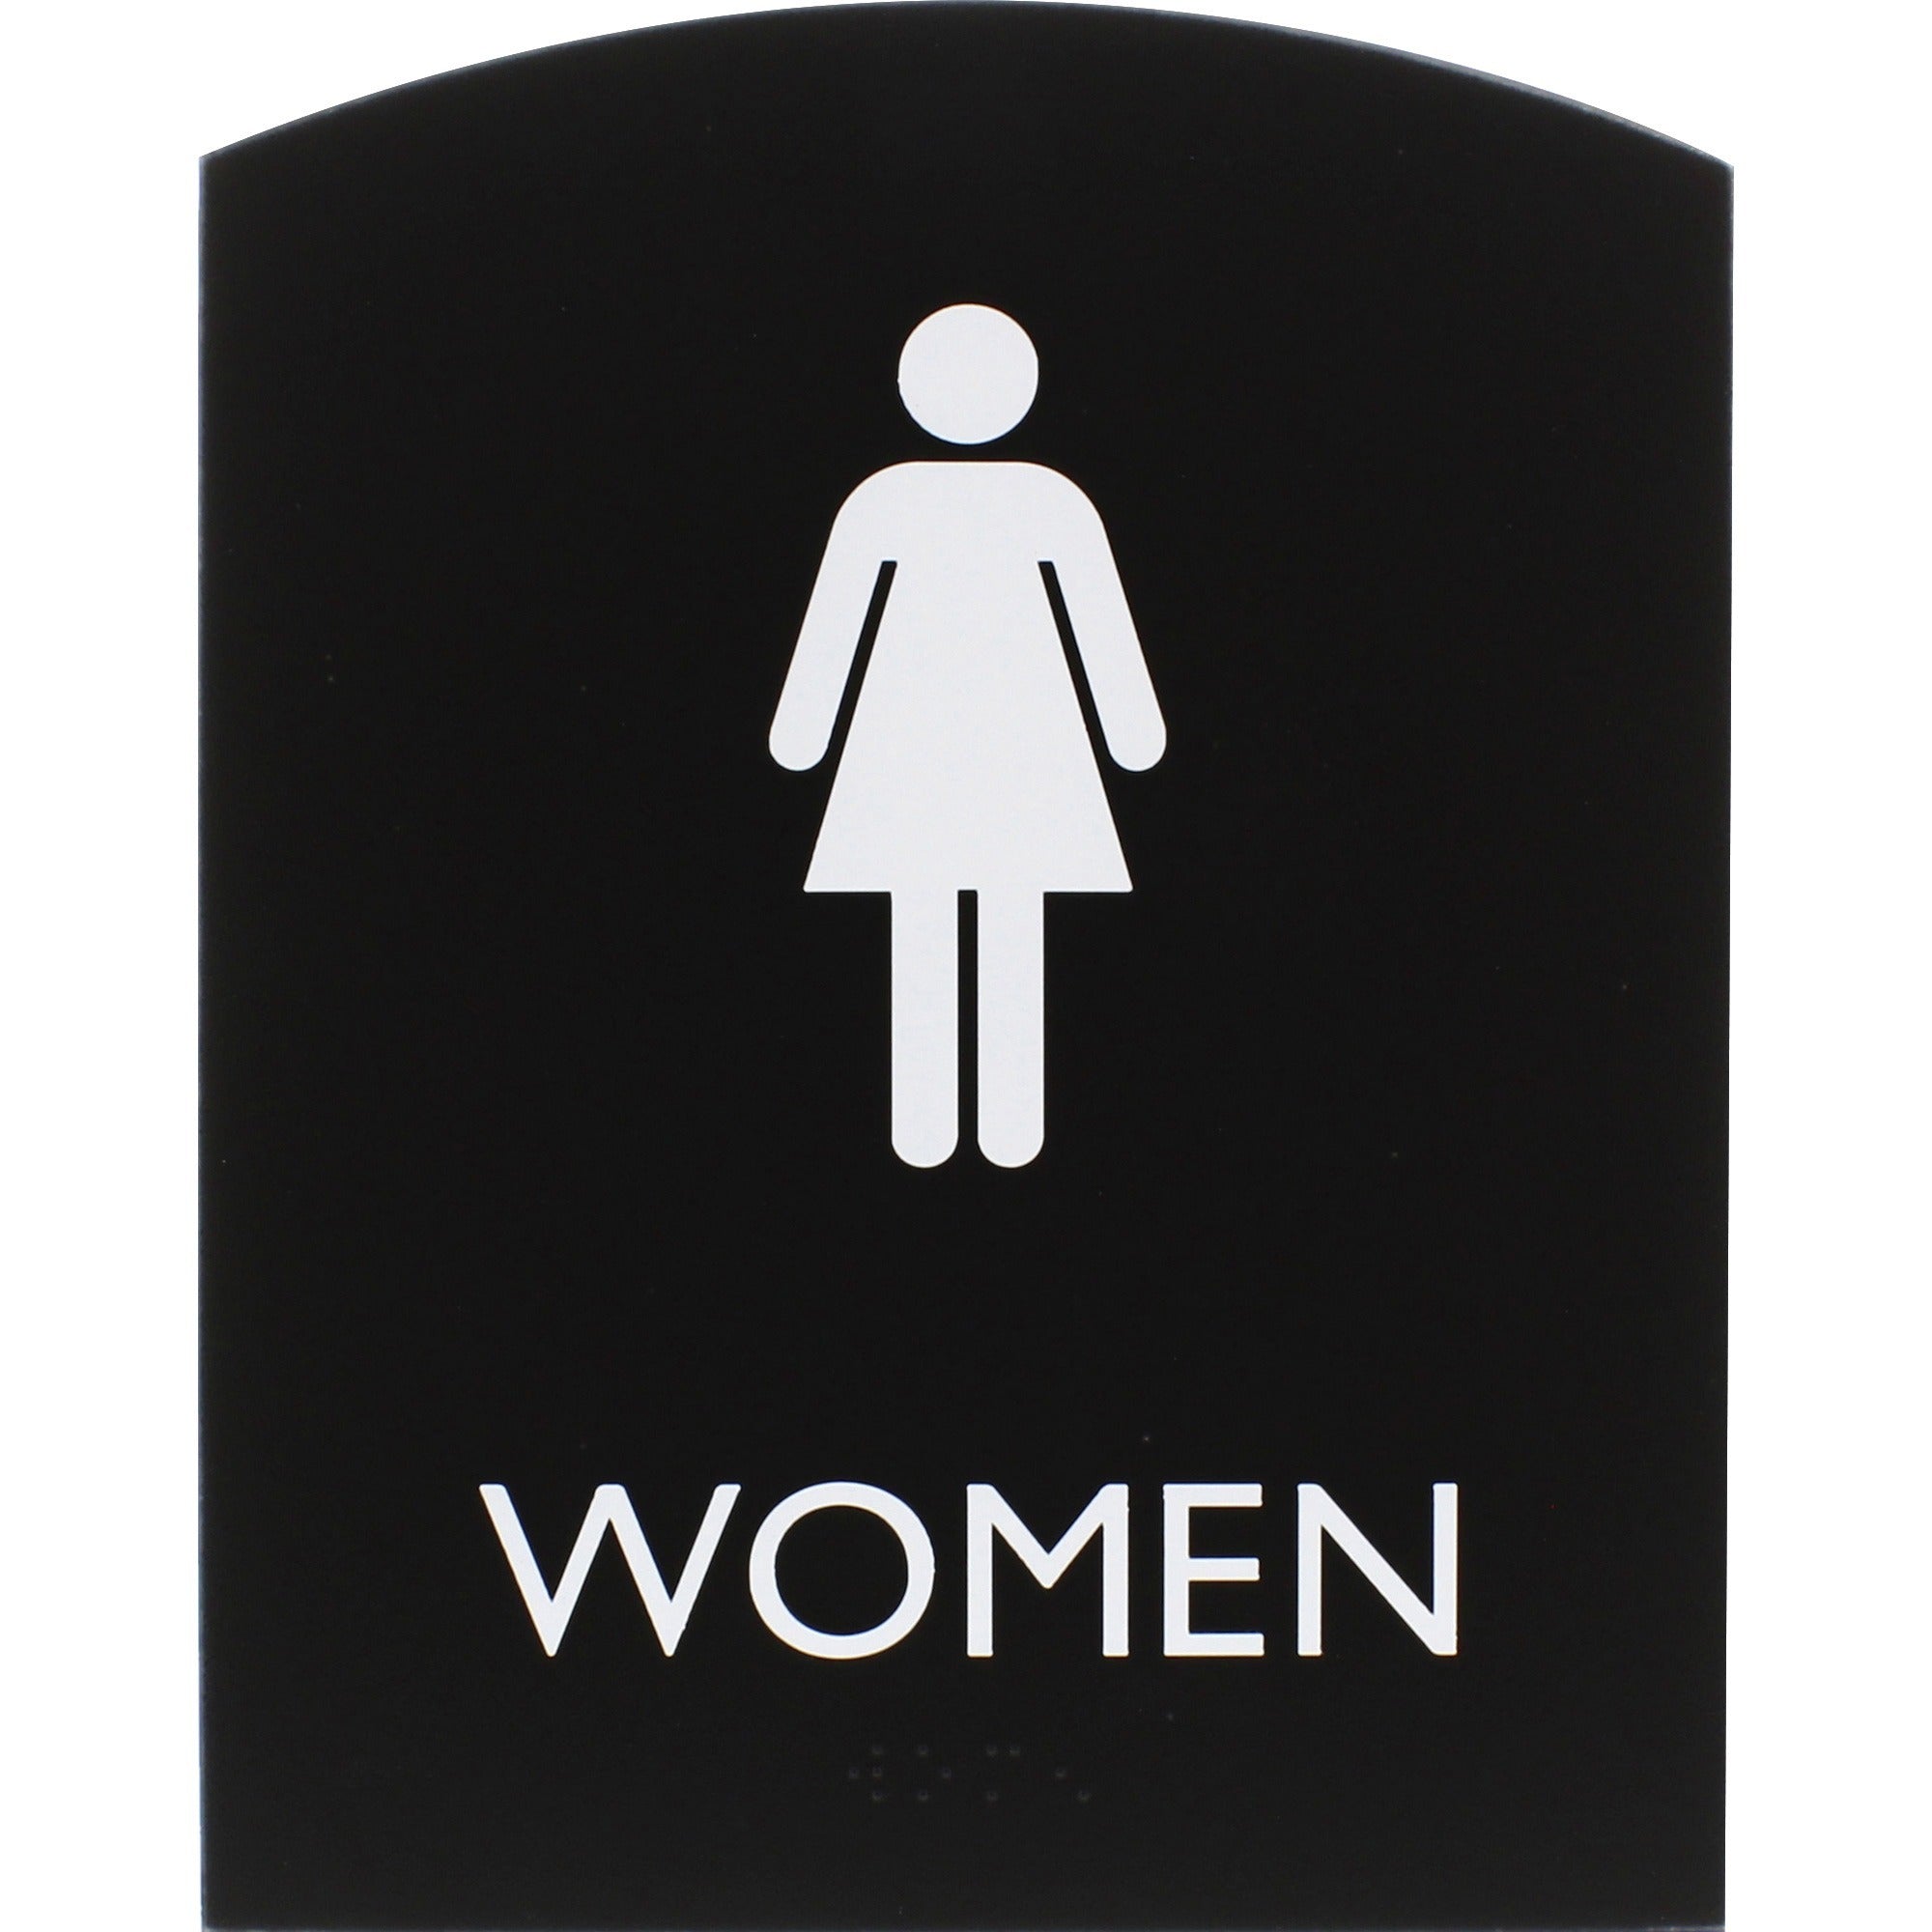 lorell-arched-womens-restroom-sign-1-each-women-print-message-68-width-x-85-height-rectangular-shape-surface-mountable-easy-readability-braille-plastic-black_llr02674 - 1